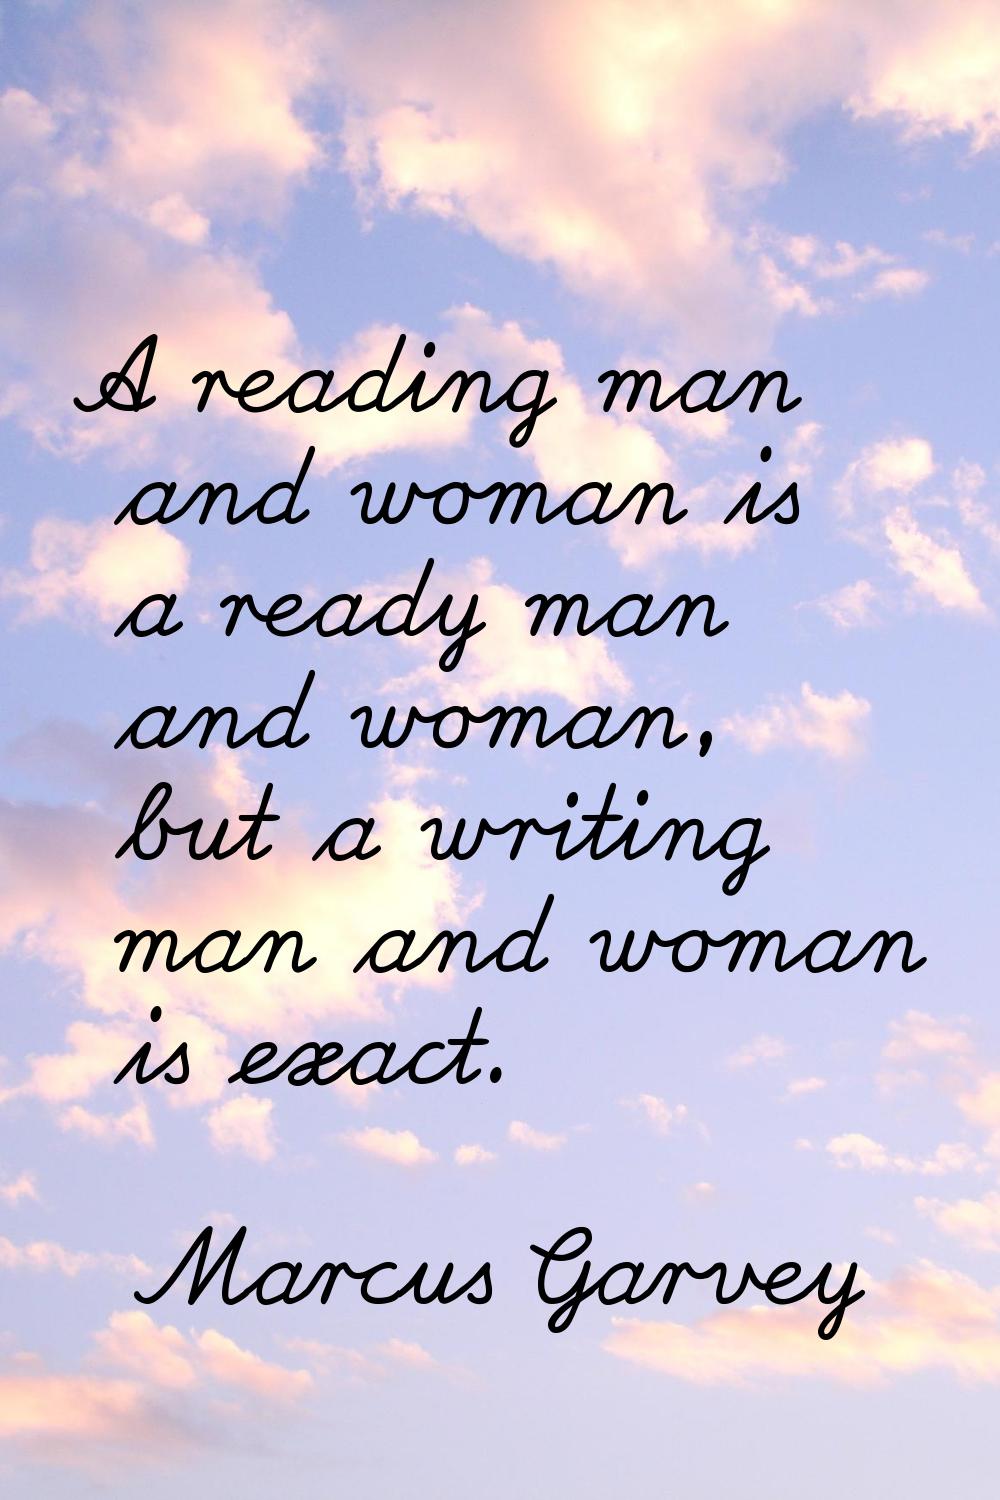 A reading man and woman is a ready man and woman, but a writing man and woman is exact.